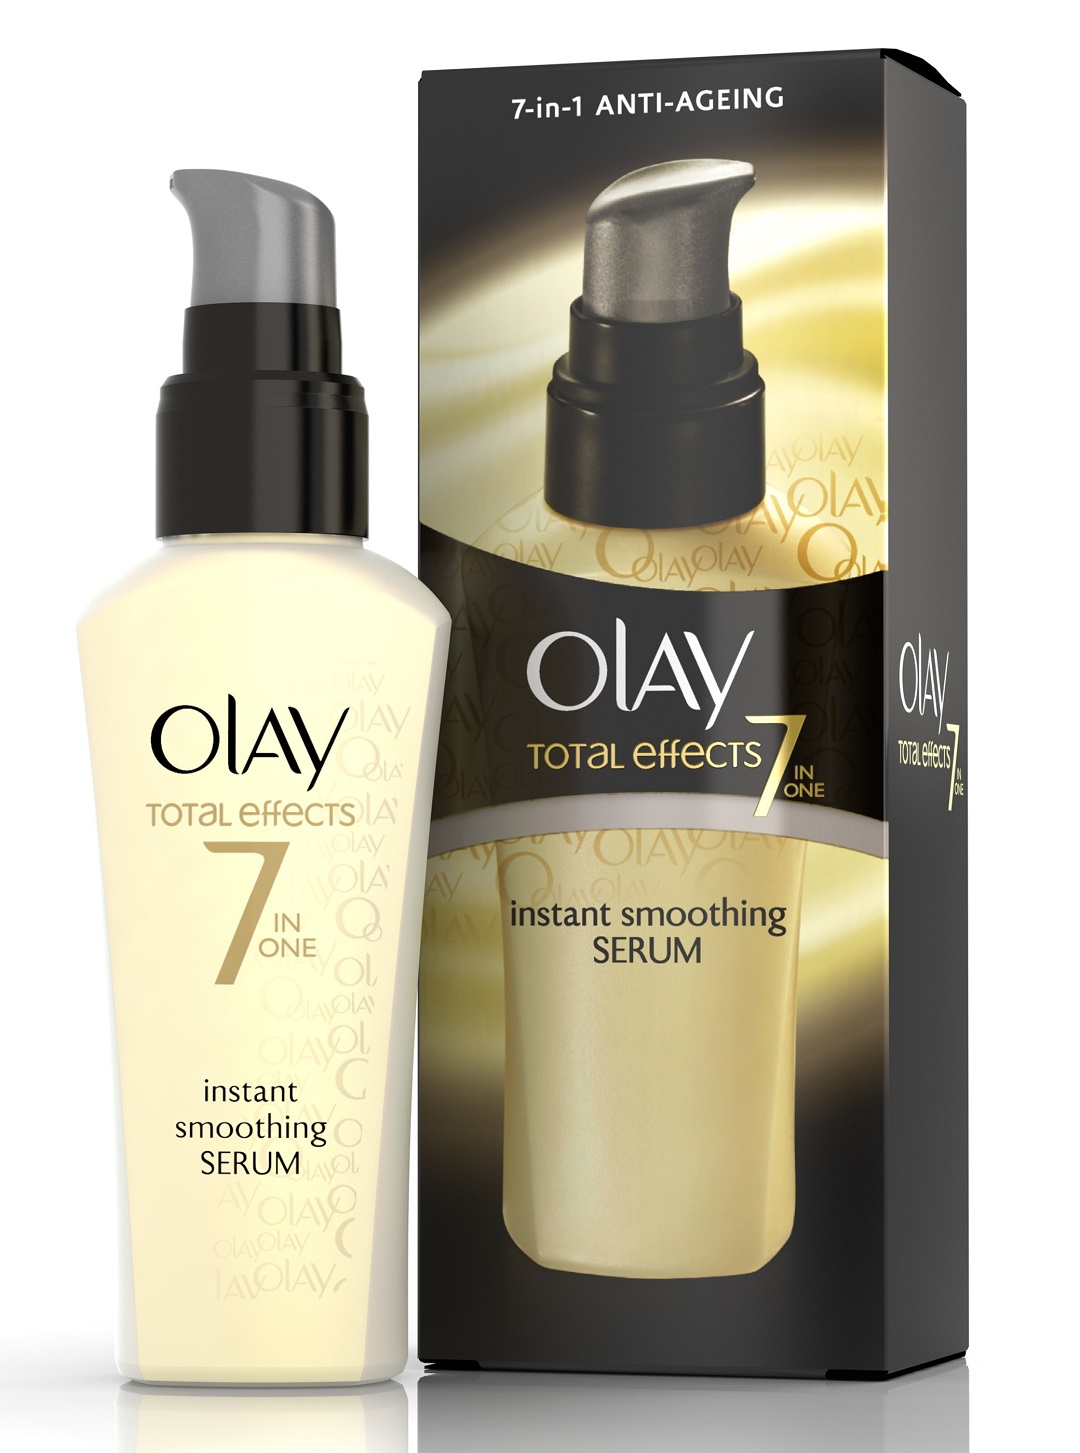 olay-total-effects-7-in-1-anti-ageing-instant-smoothing-serum